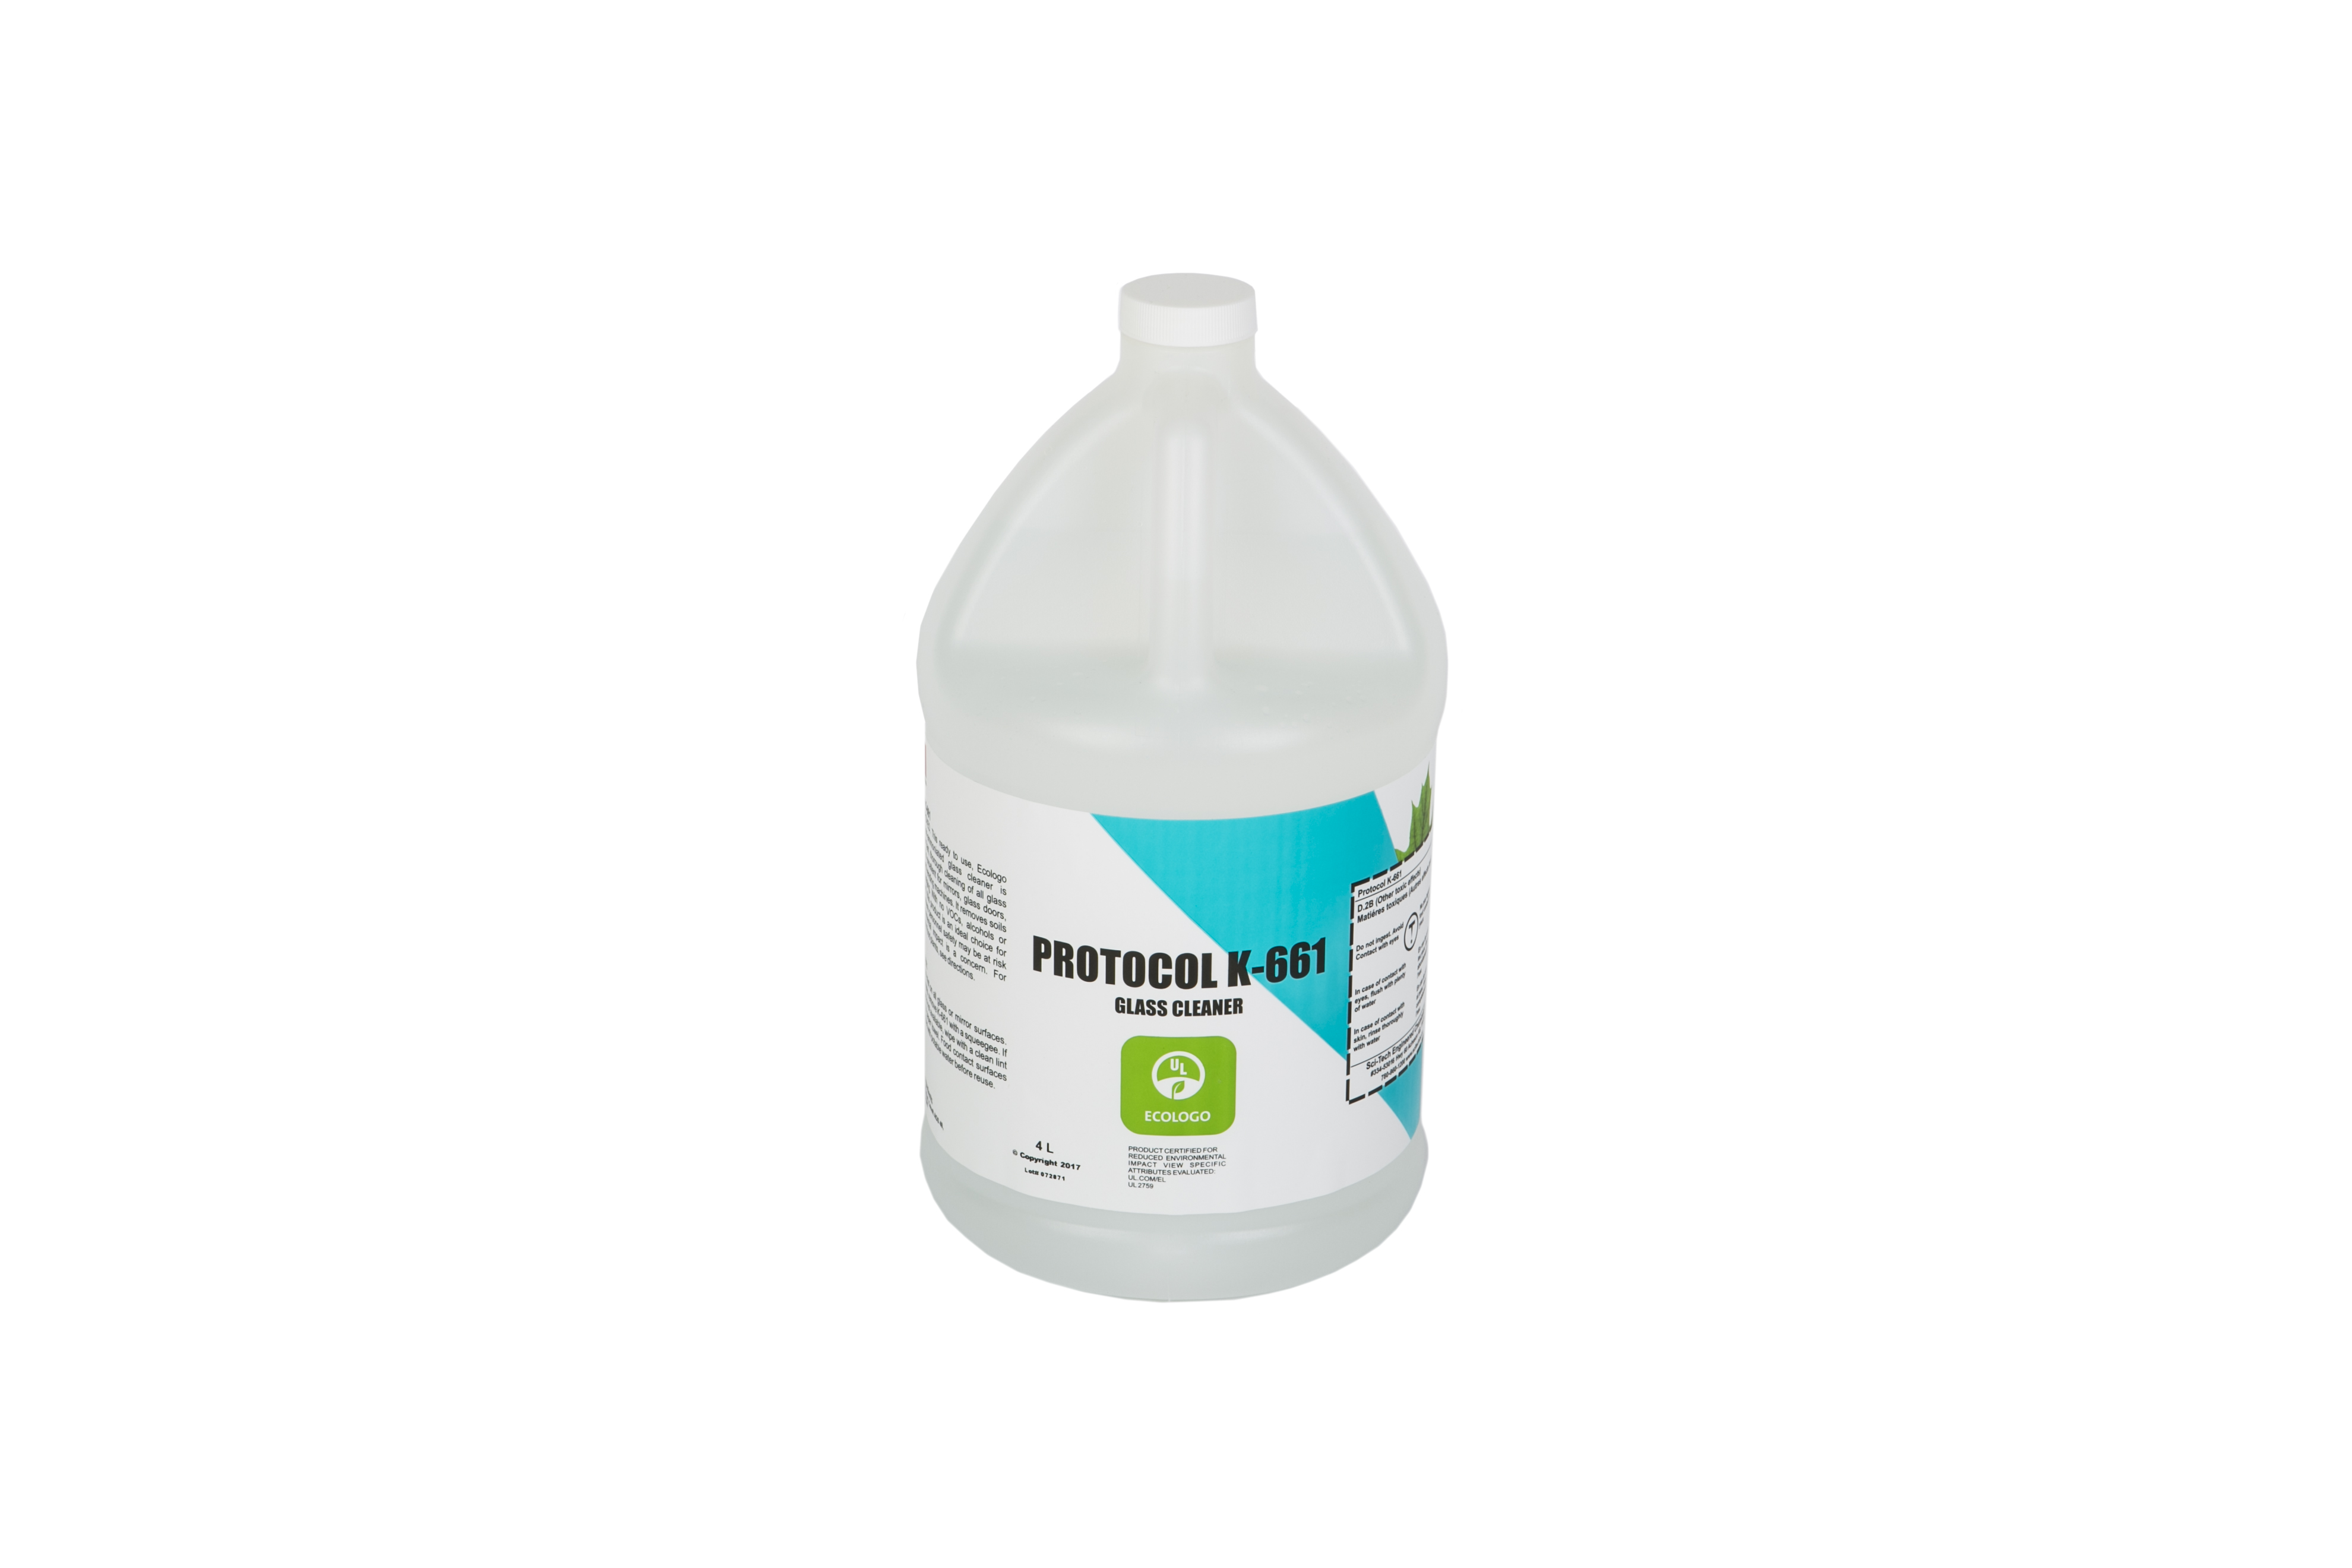 Protocol K661 UL Eco Certified Glass Cleaner - 4 Litre